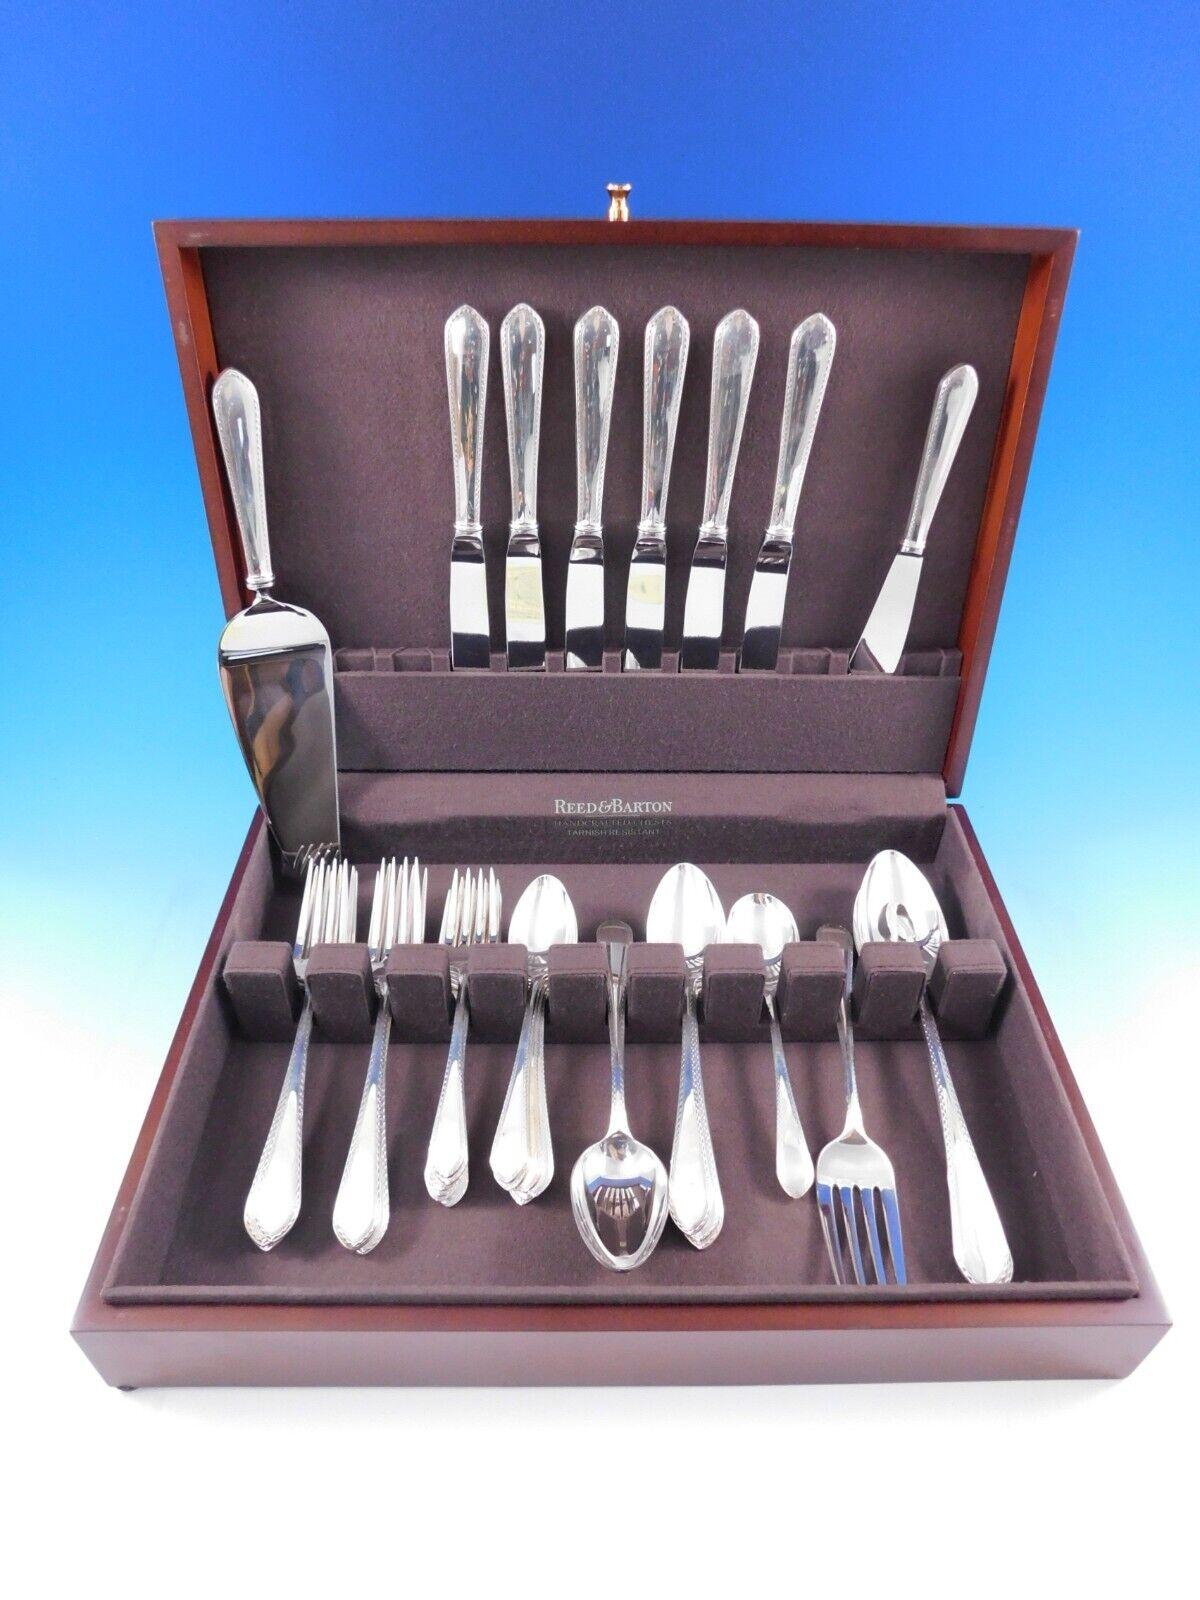  Scarce Early Colonial by Lunt Sterling Silver Flatware set - 36 pieces. This set includes:

6 Knives, 9 1/8